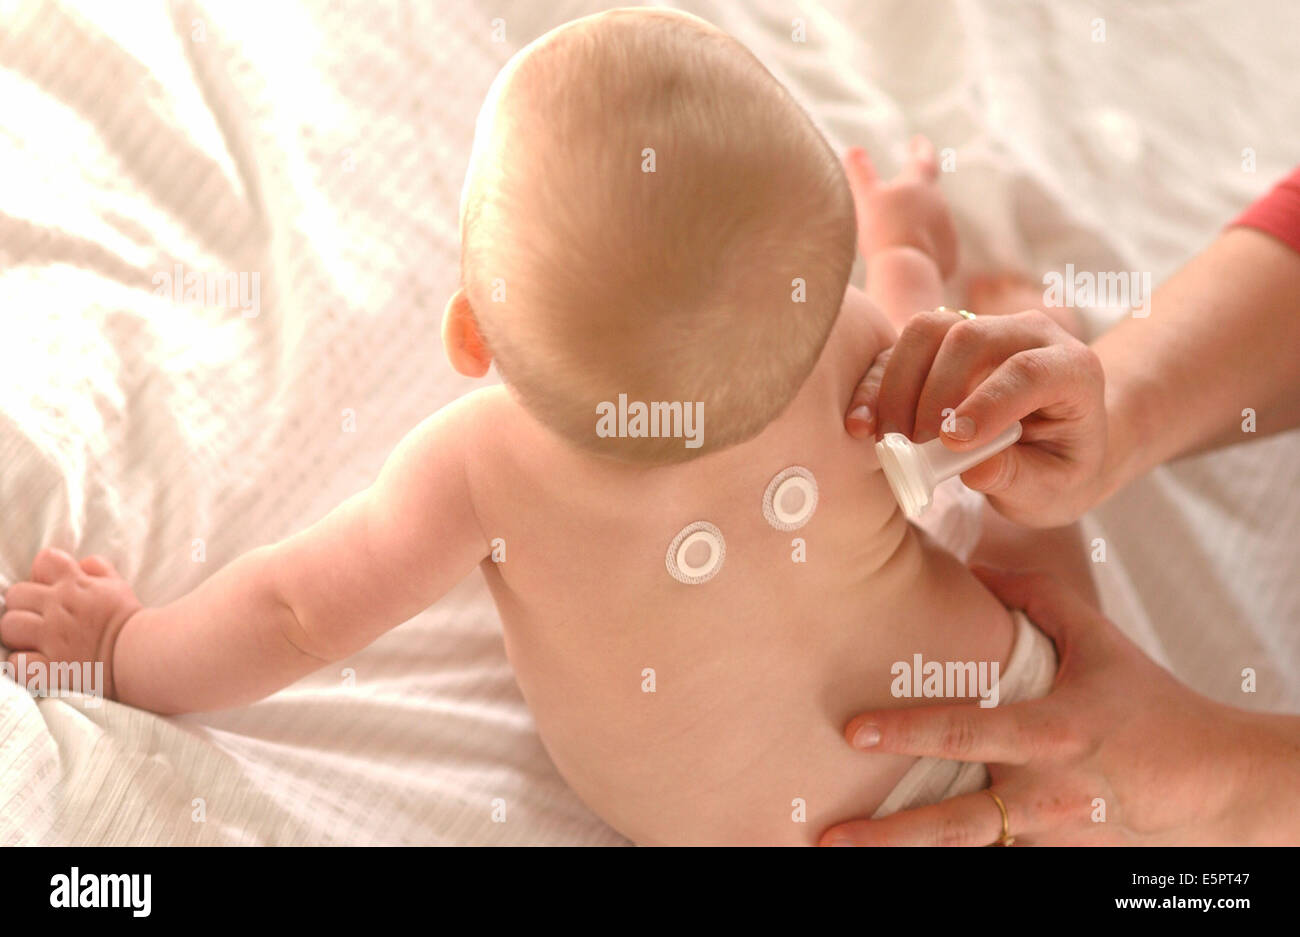 E-patch Milk is a patch-test designed to test cow’s milk protein tolerance in infants. Stock Photo